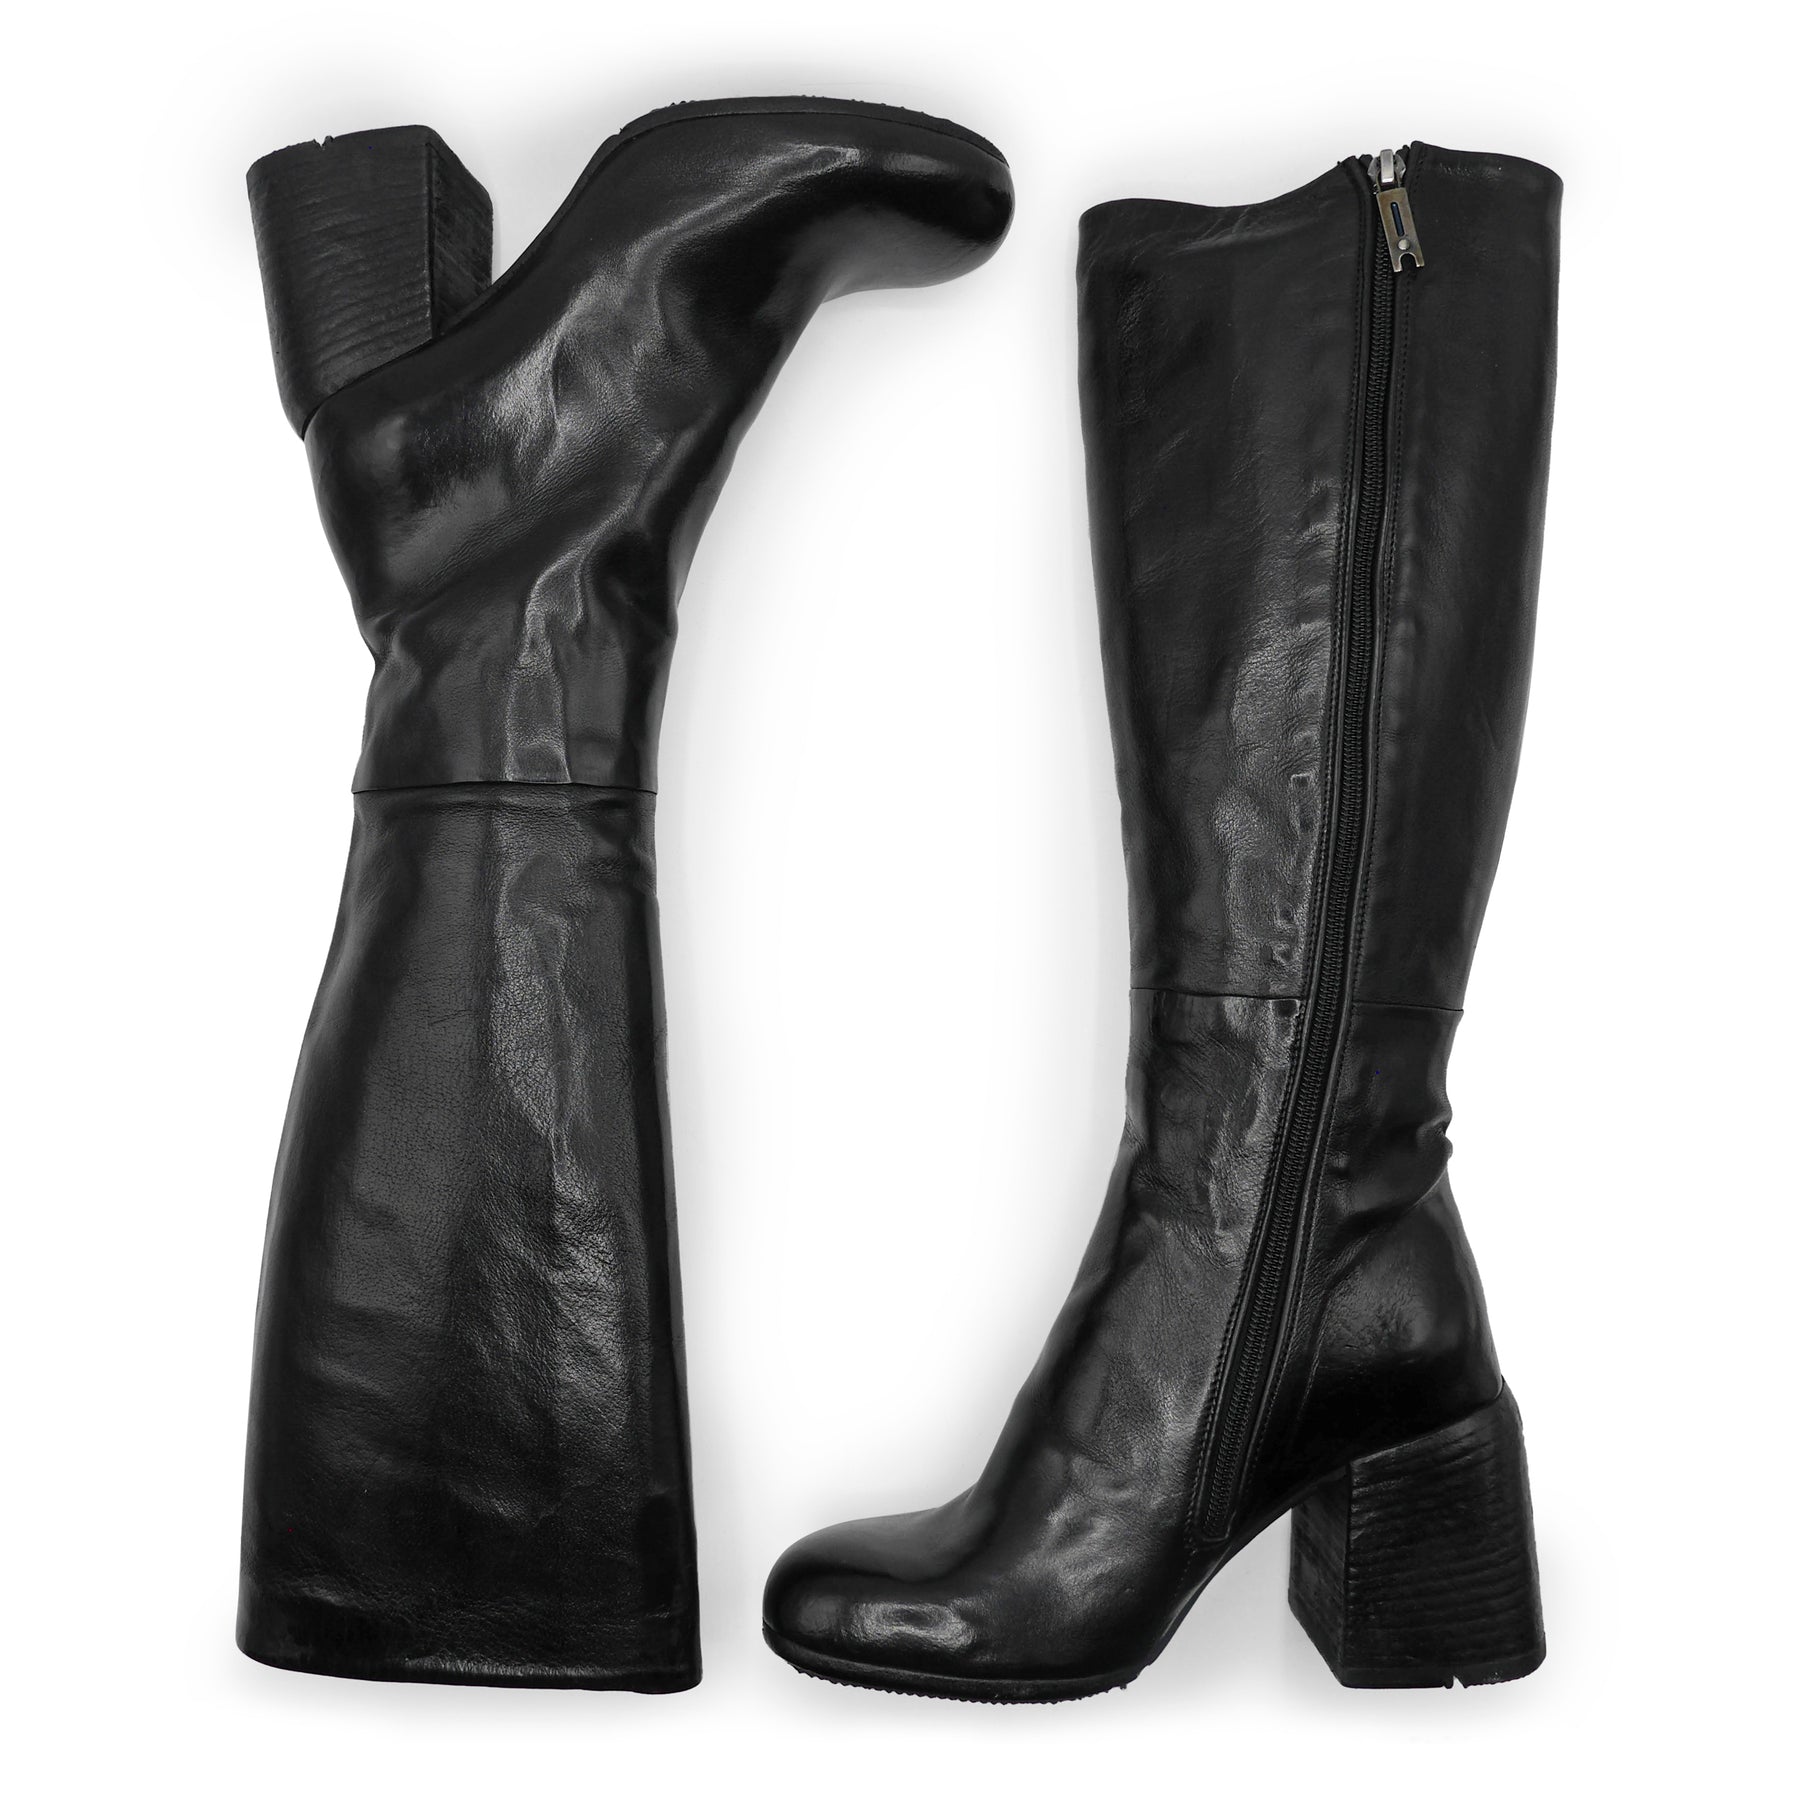 FPOIA - Black Knee High Leather Boot